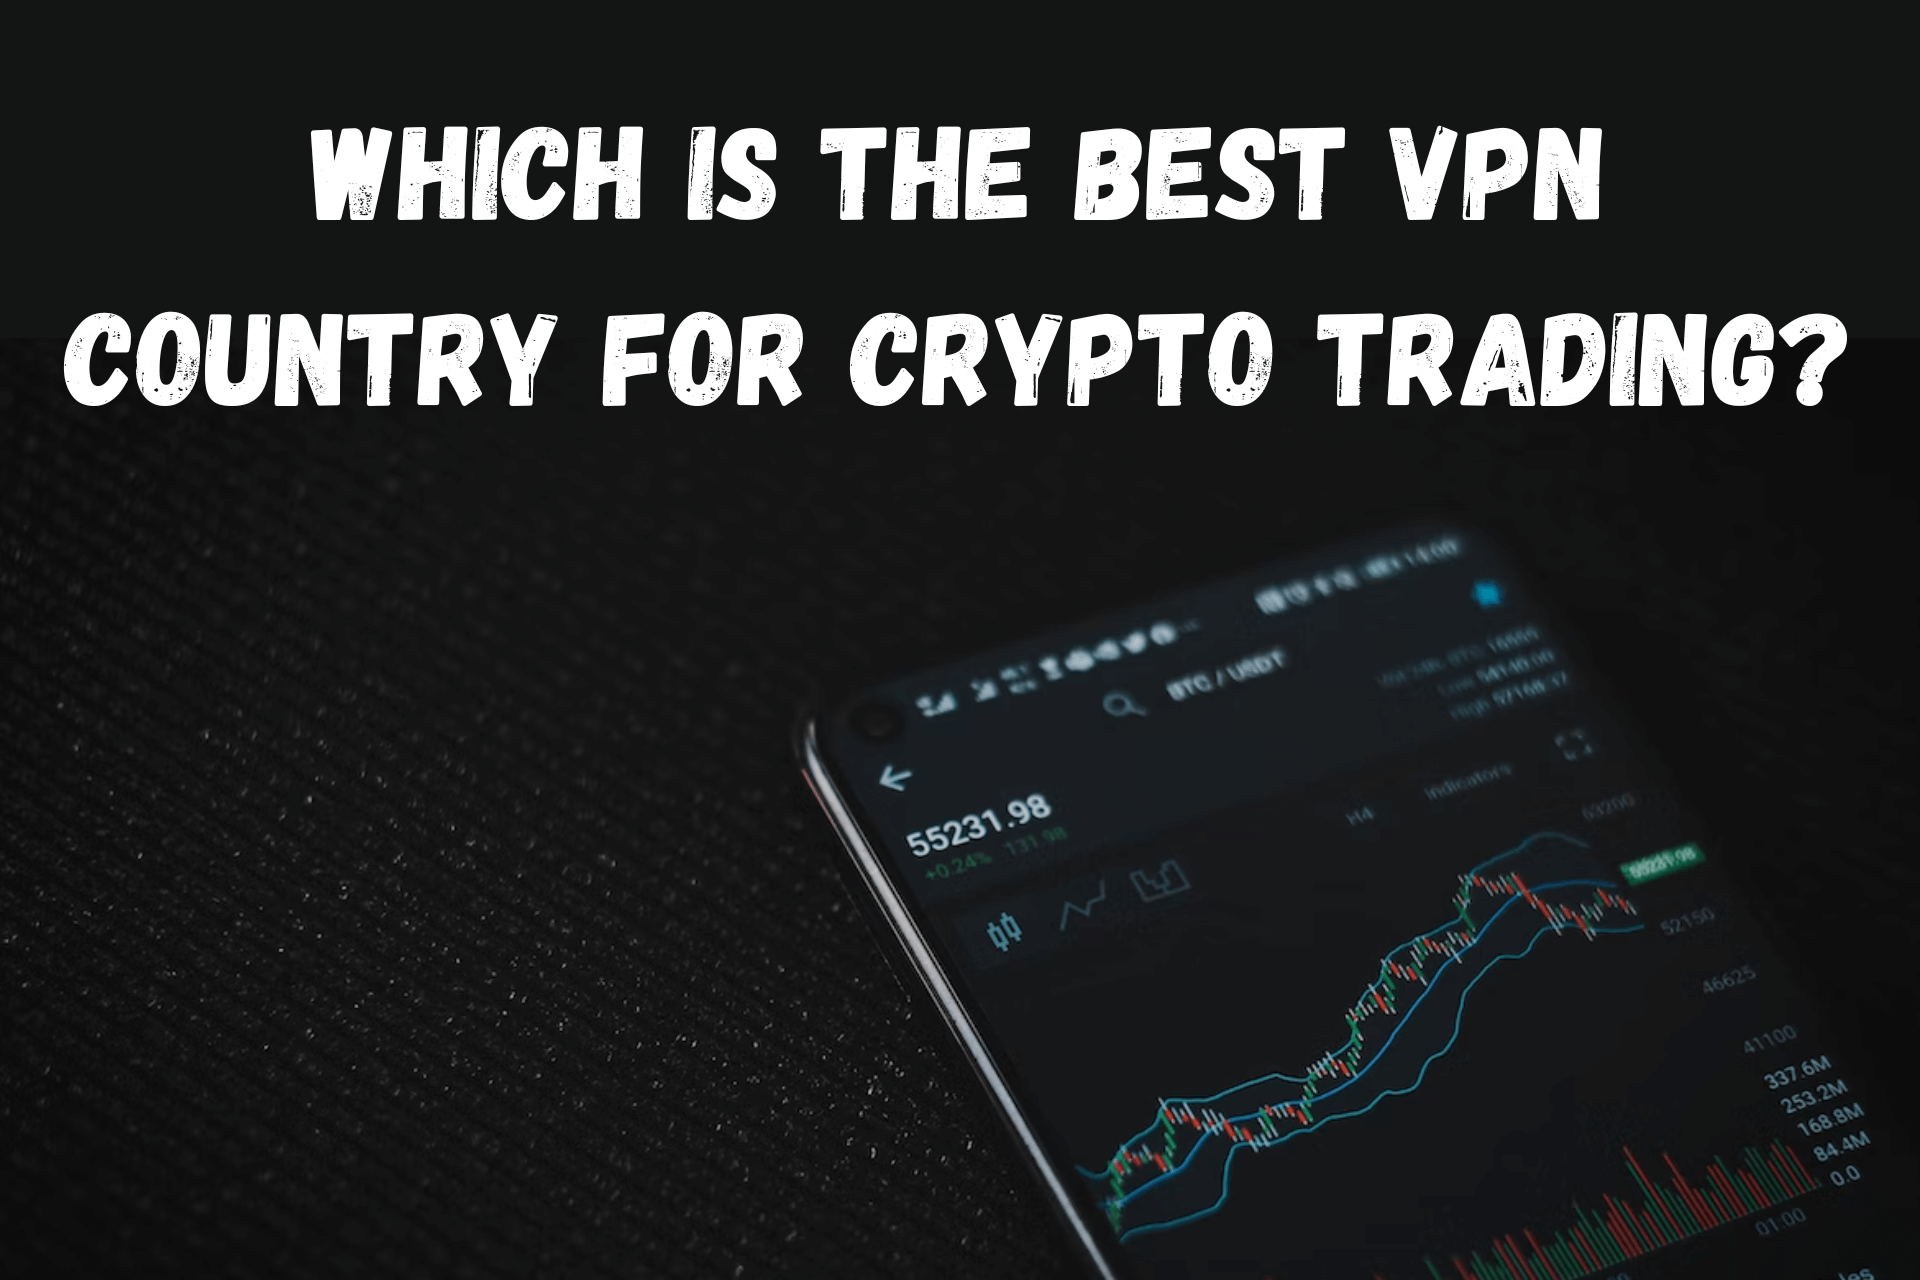 best country for VPN crypto